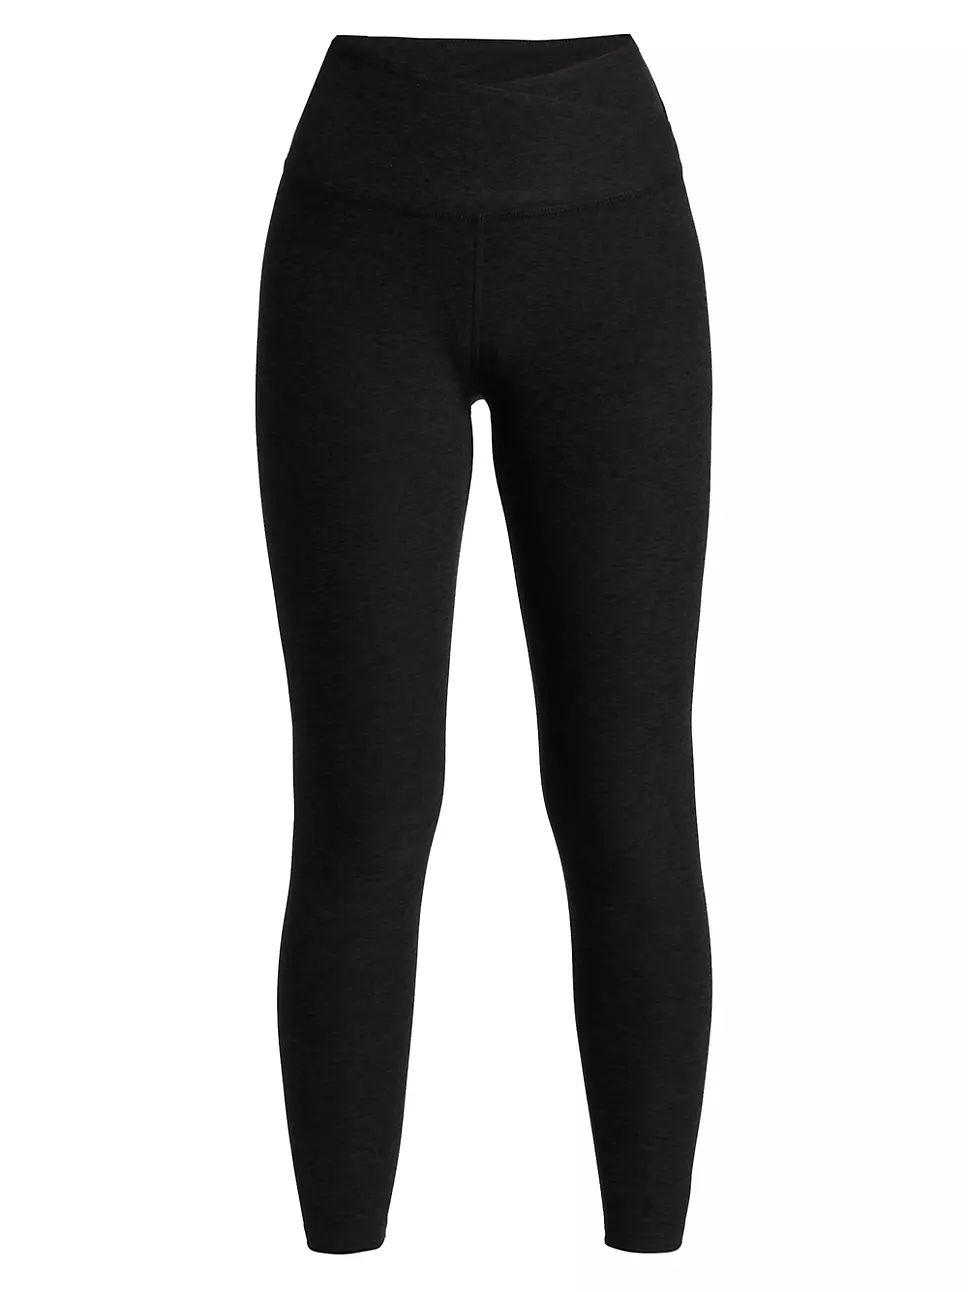 At Your Leisure High-Waisted Cropped Leggings | Saks Fifth Avenue